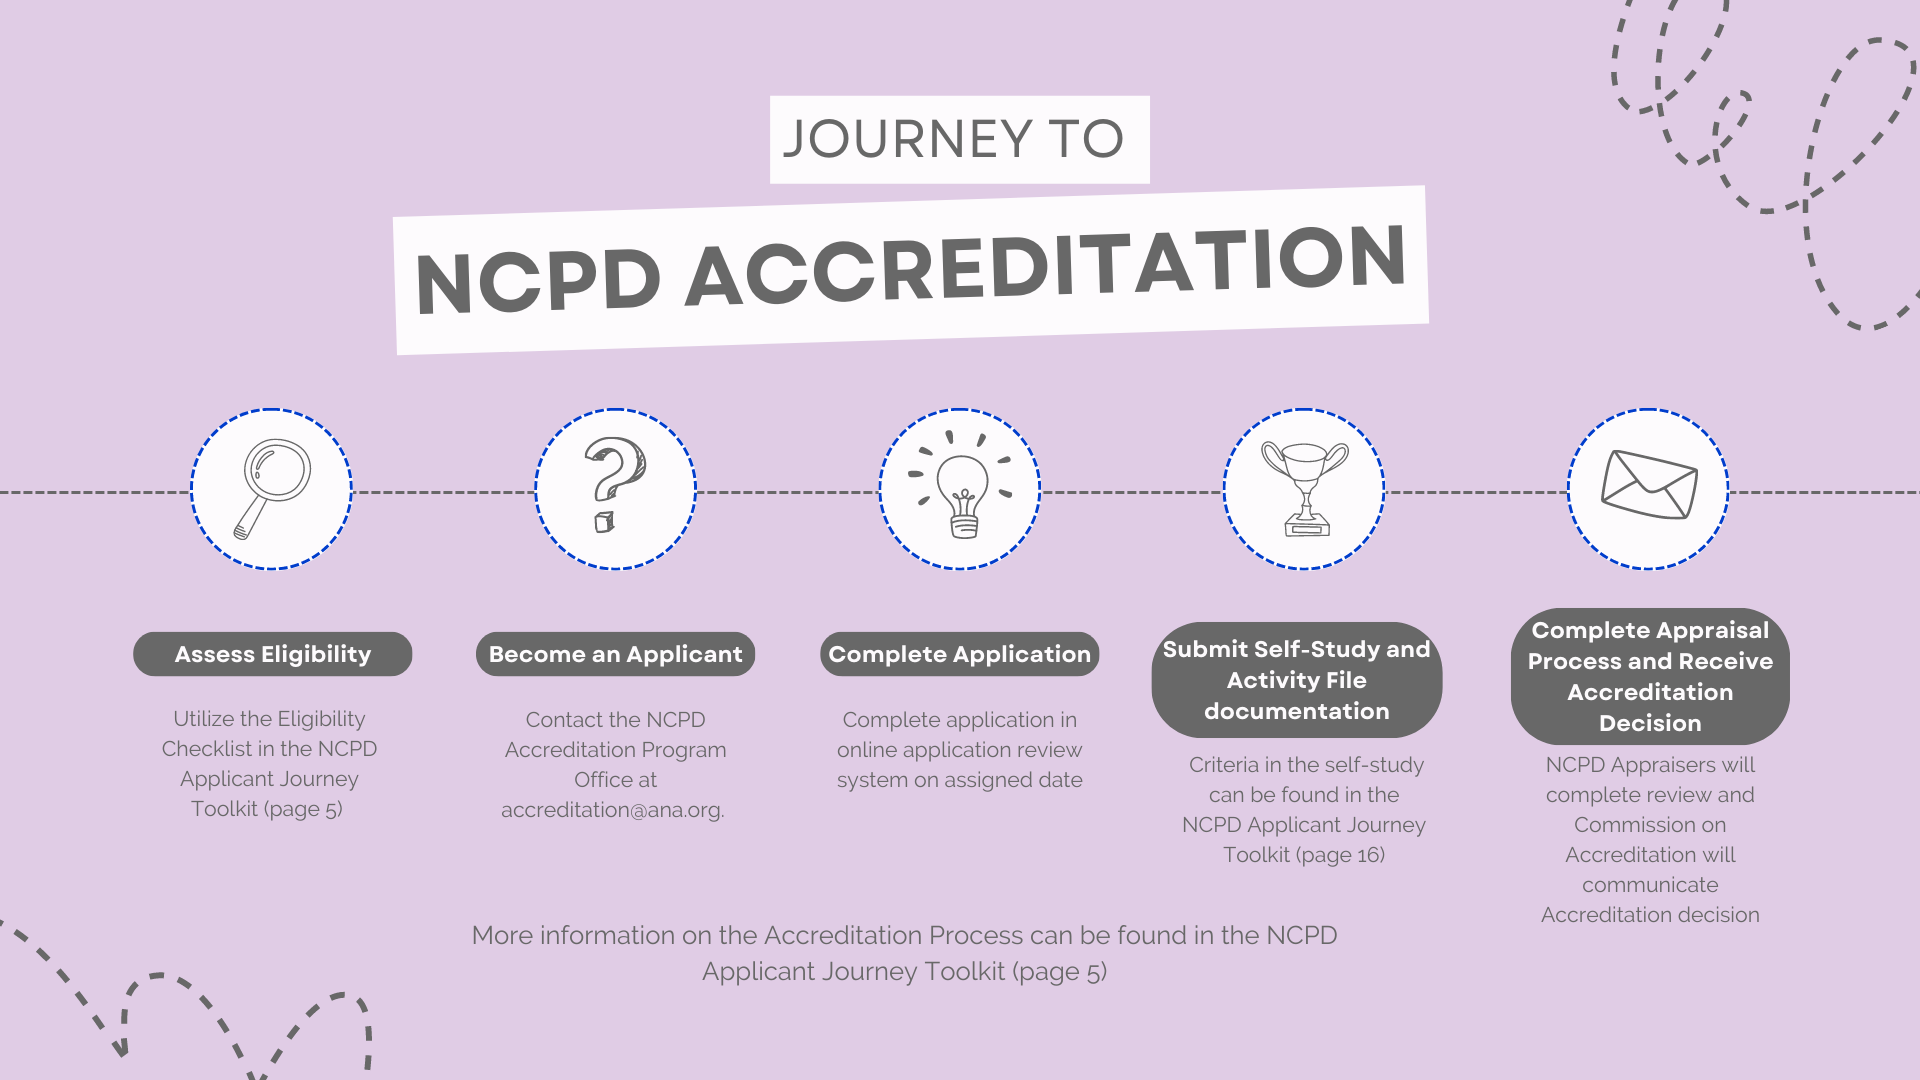 NCPD Accreditation Timeline Graphic